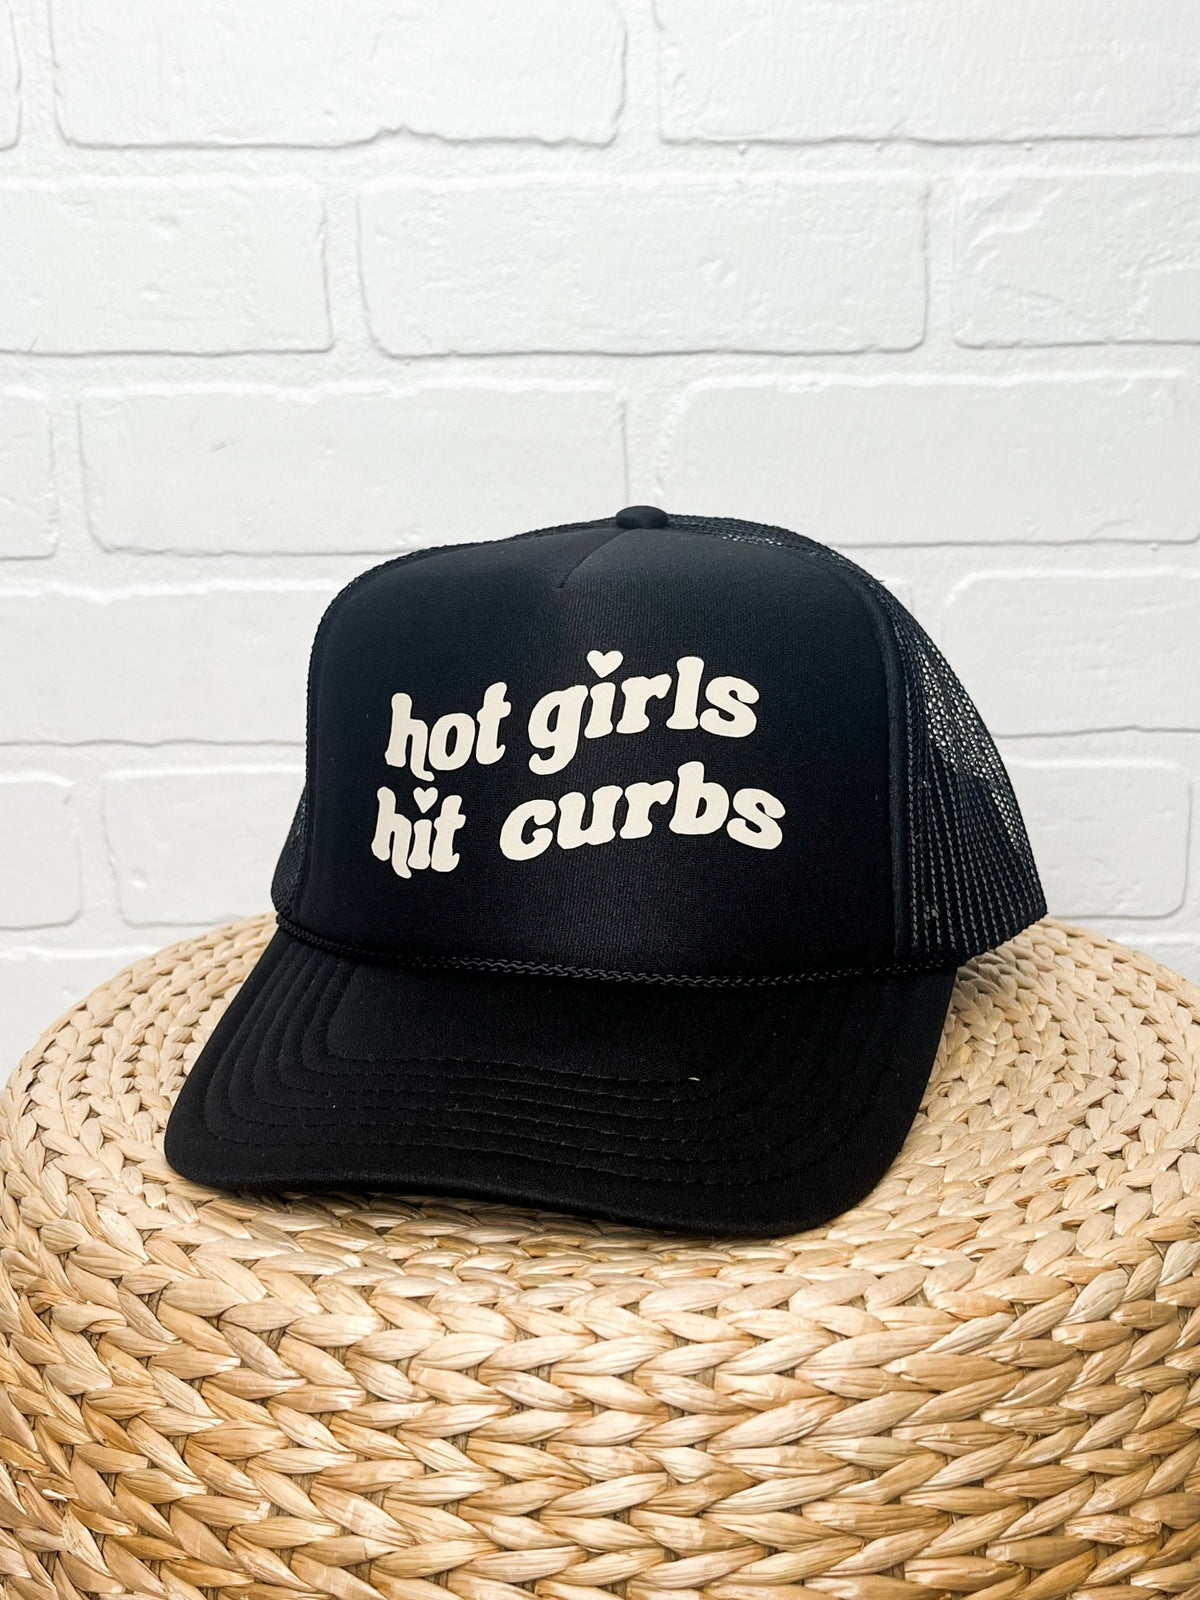 Hot girls hit curbs trucker hat black - Trendy Hats at Lush Fashion Lounge Boutique in Oklahoma City